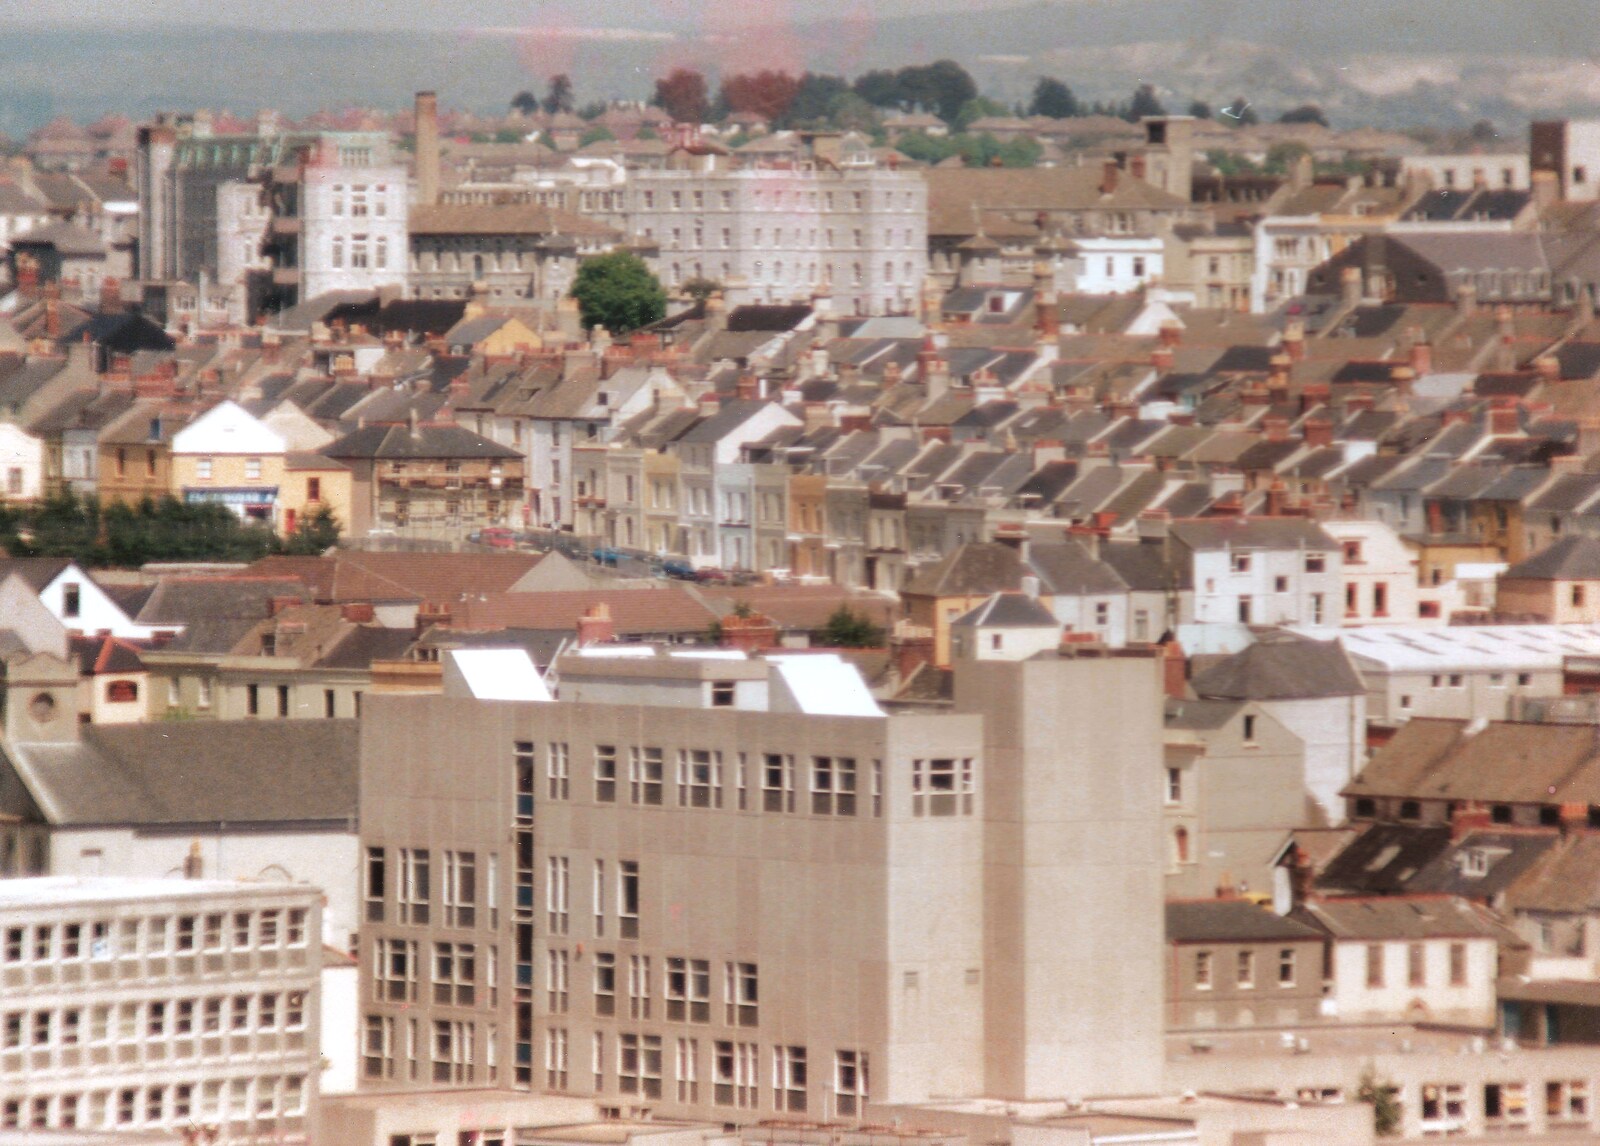 The Mount Street digs are in the middle from Aerial Scenes of Plymouth, Devon - 28th June 1987